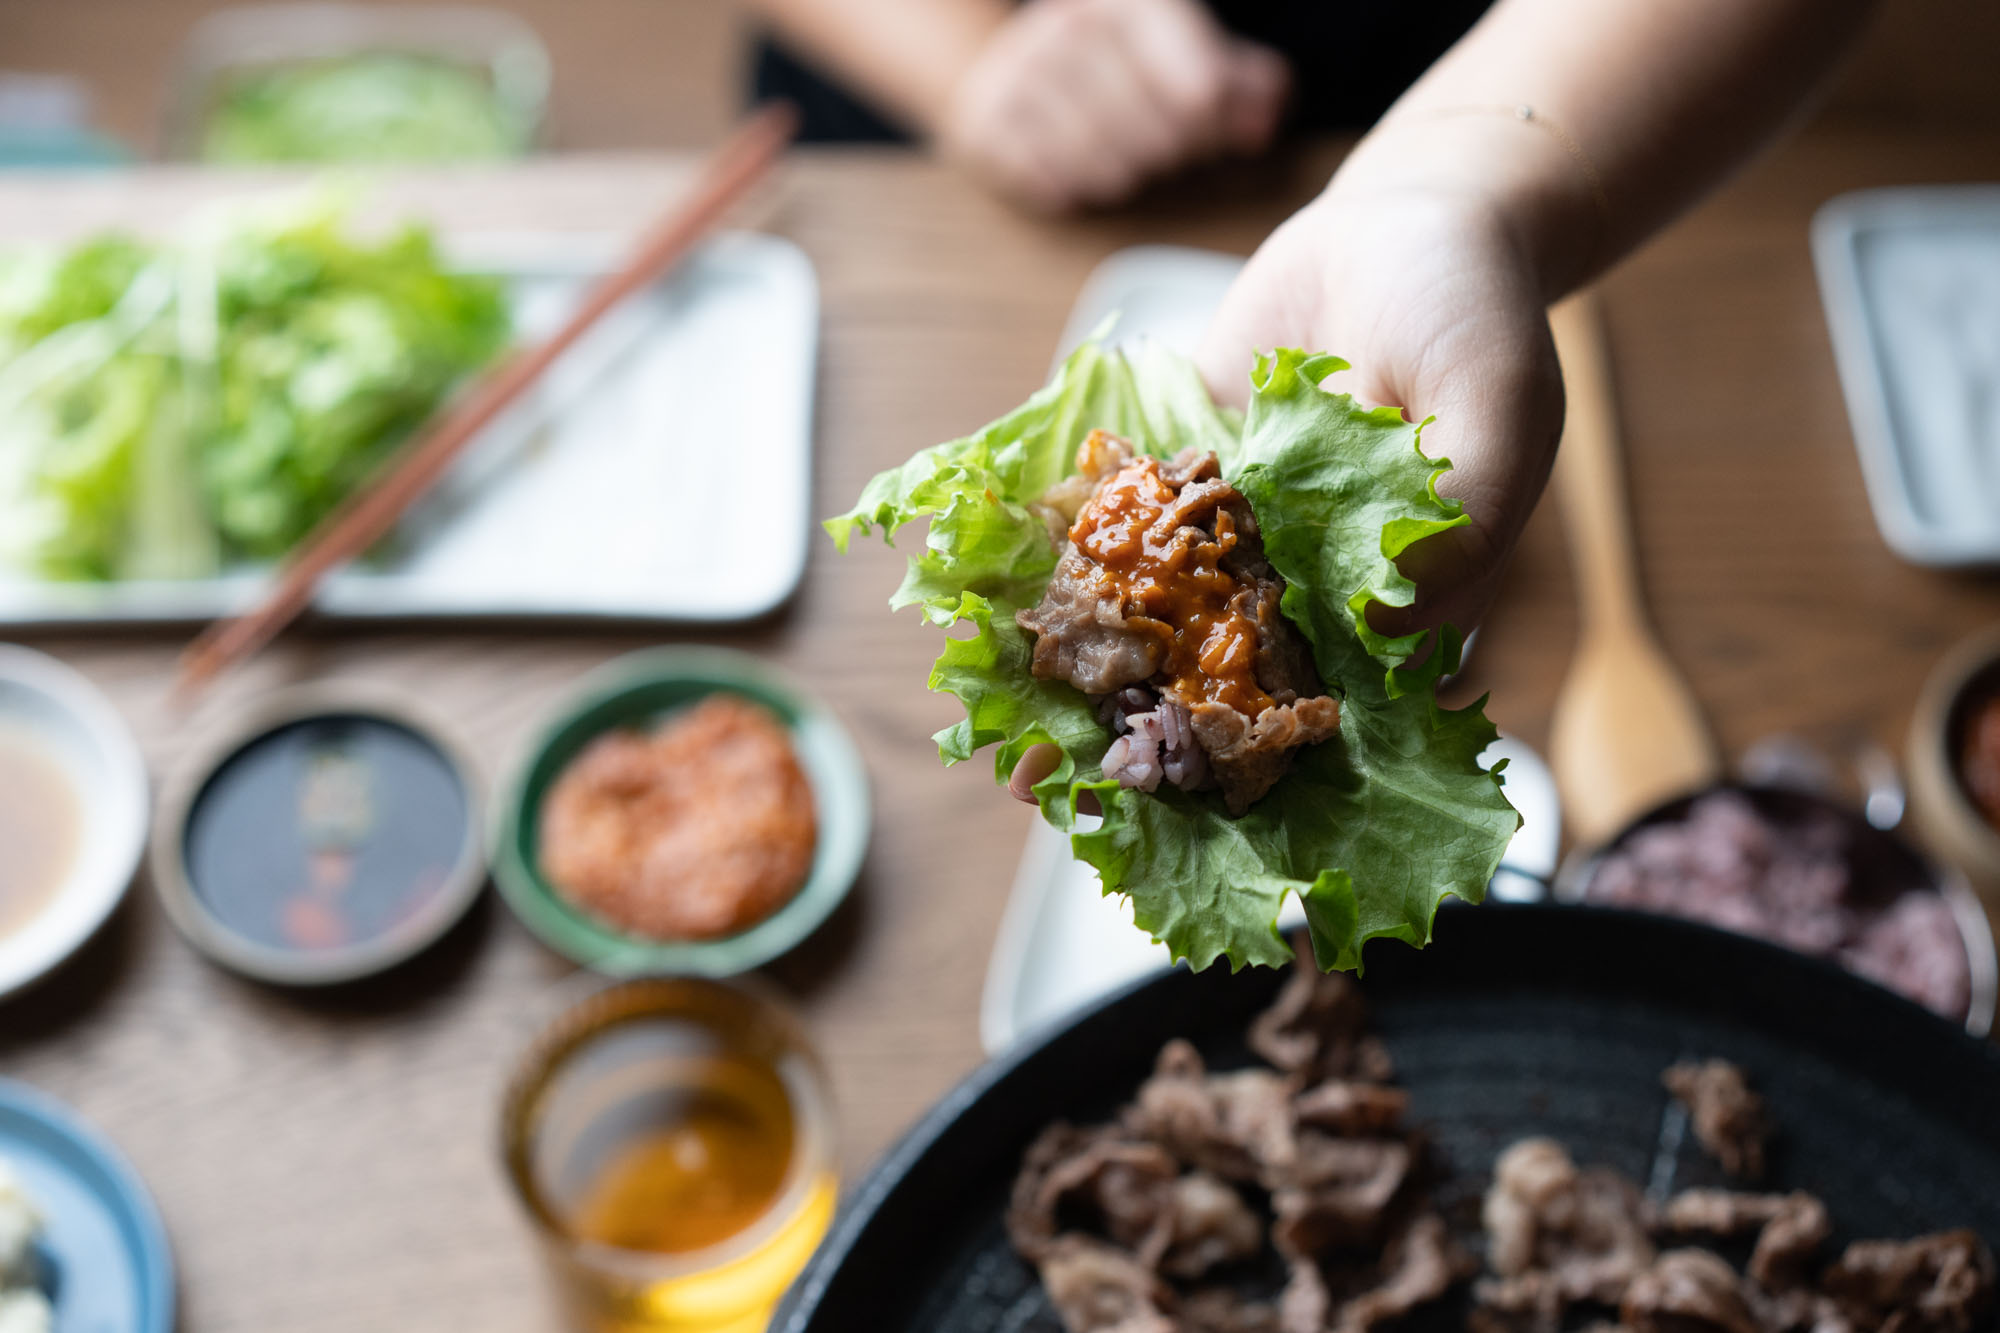 The Complete Guide to Korean BBQ at Home - Hungry Huy